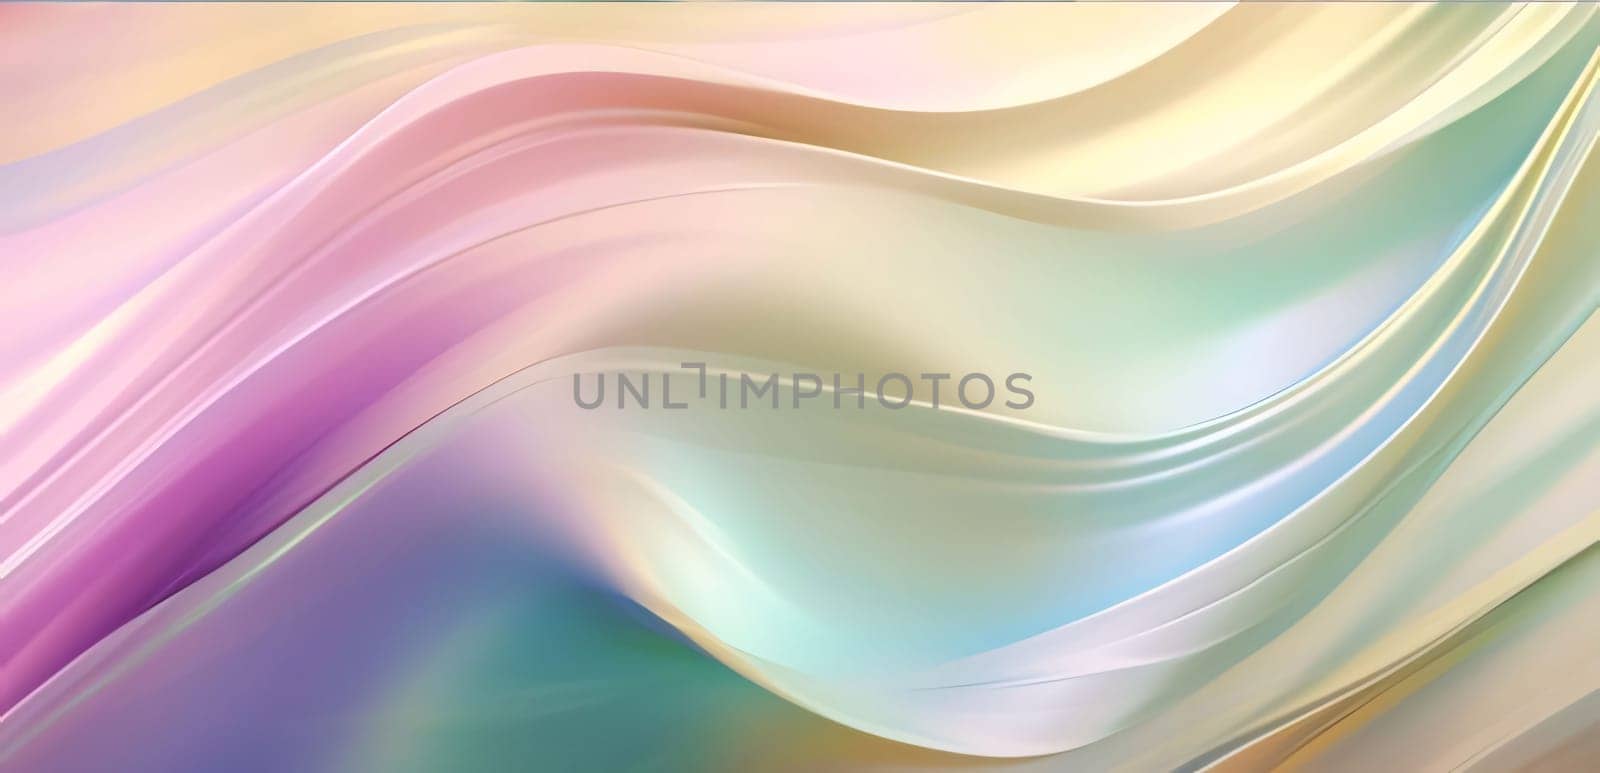 Abstract background design: abstract background with smooth lines in blue, pink and yellow colors